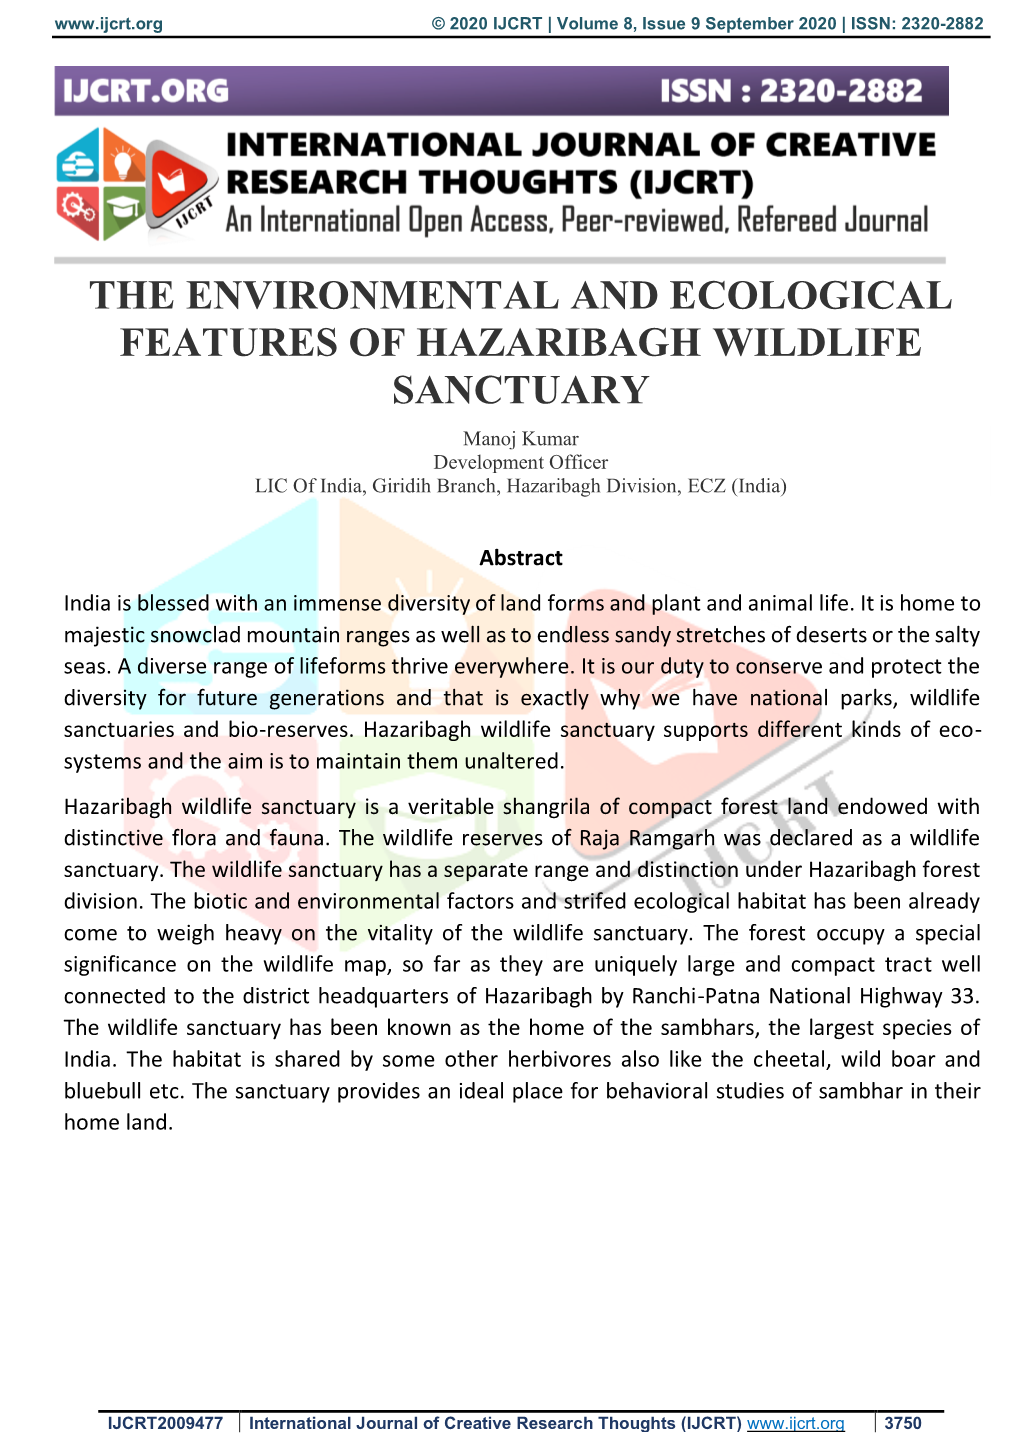 The Environmental and Ecological Features of Hazaribagh Wildlife Sanctuary